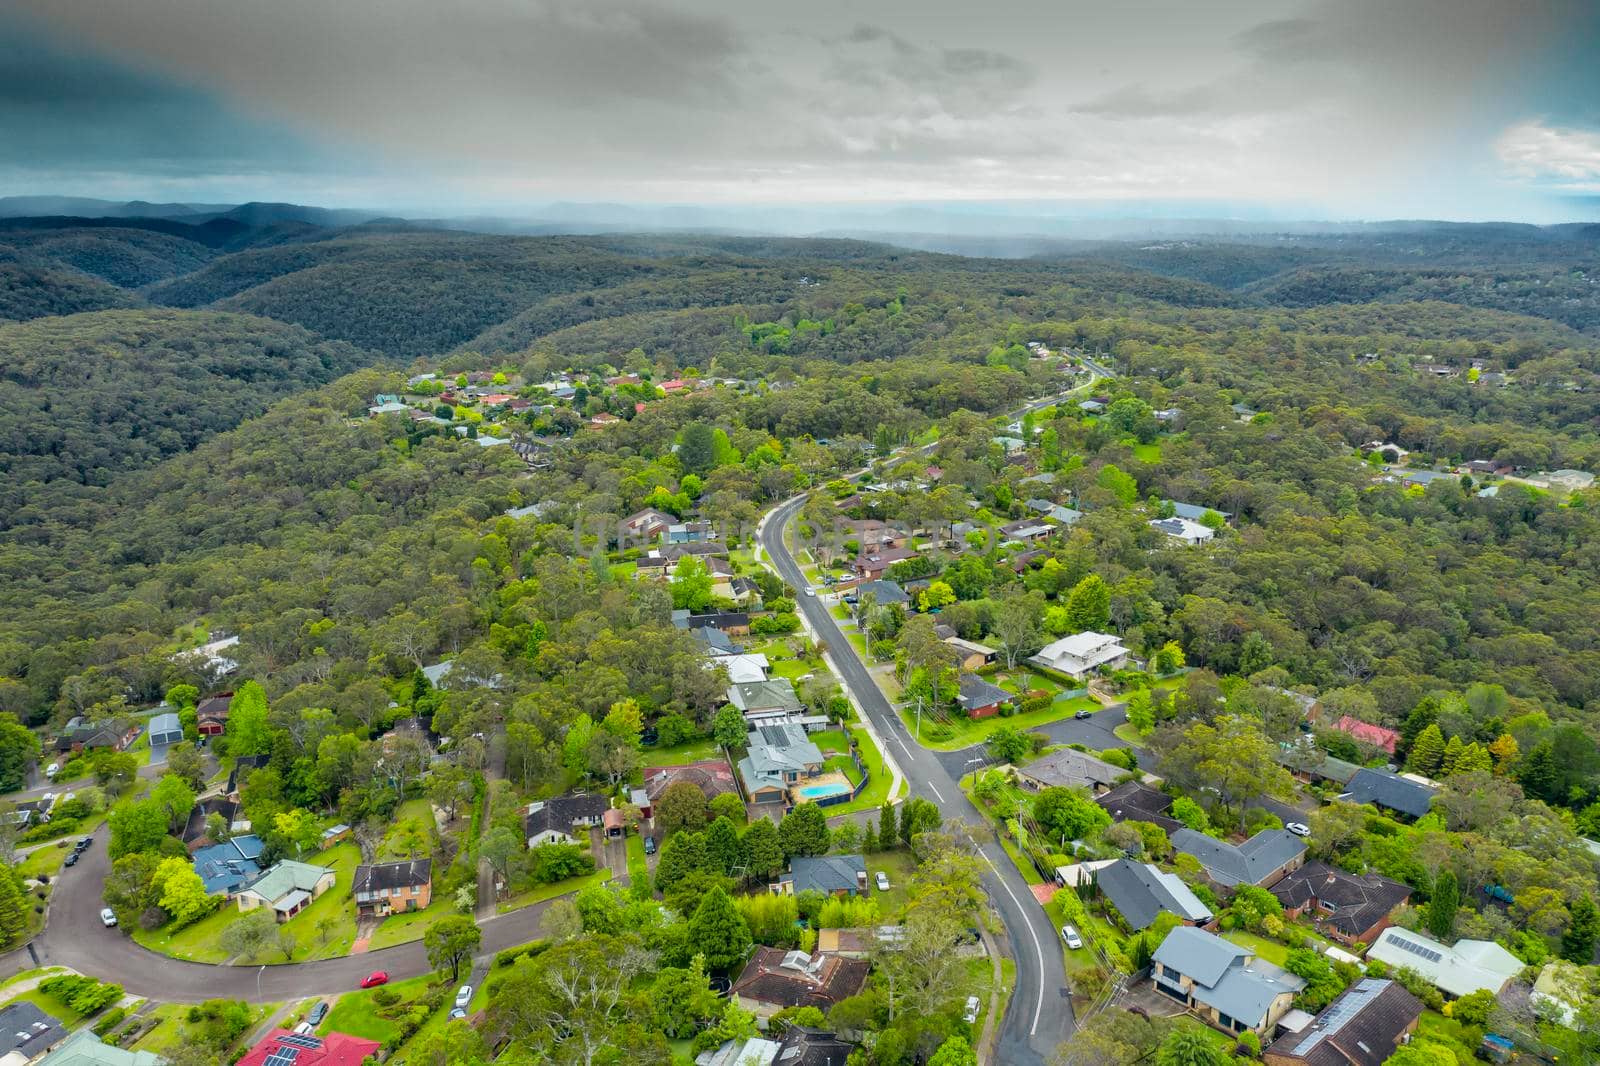 Aerial view of the township of Faulconbridge in regional New South Wales in Australia by WittkePhotos